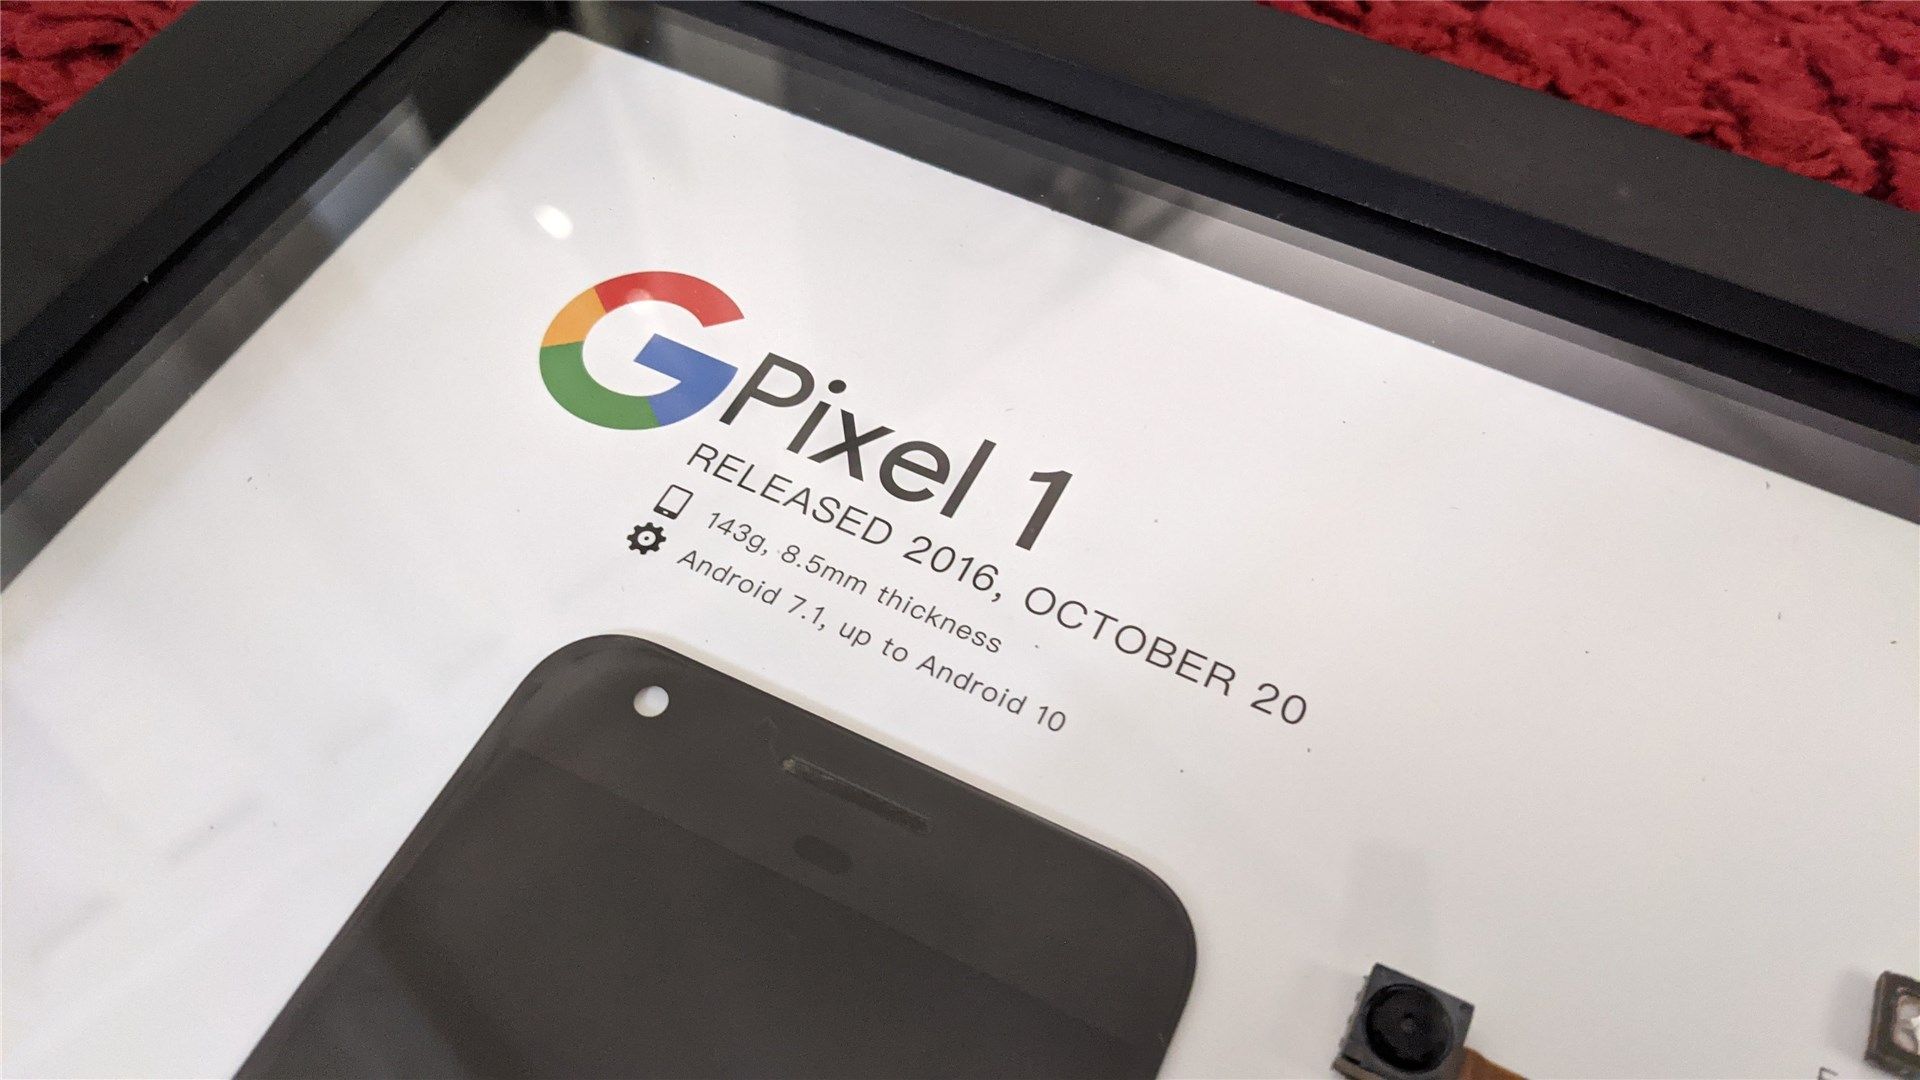 A close up of the Pixel 1 details, including release date and Android versions